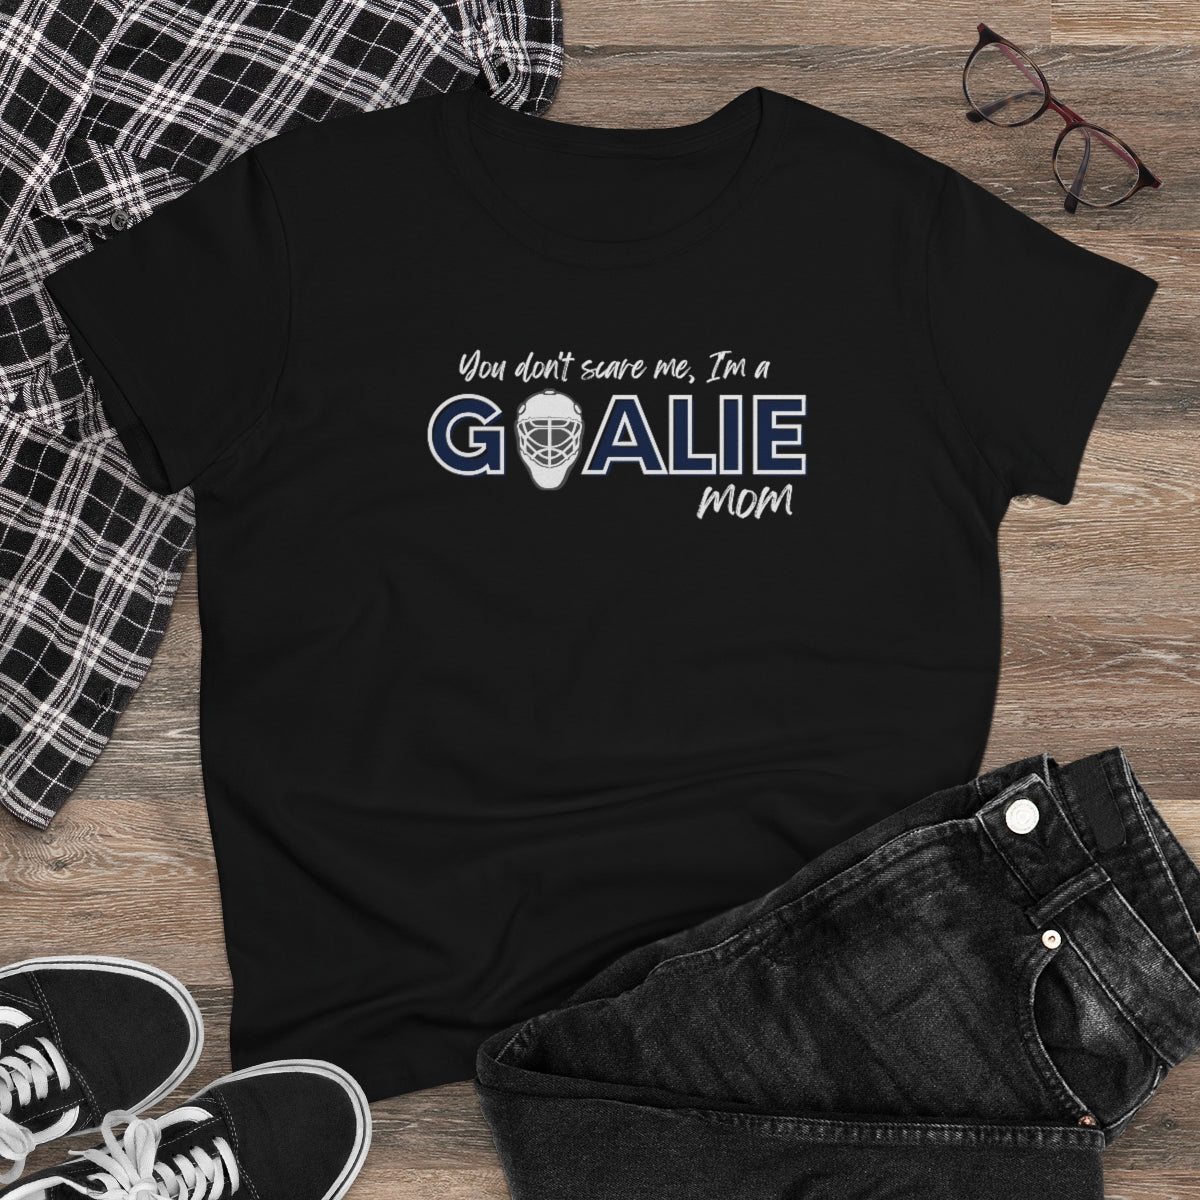 You don't scare me, I'm a Goalie Mom - Ladies Tee